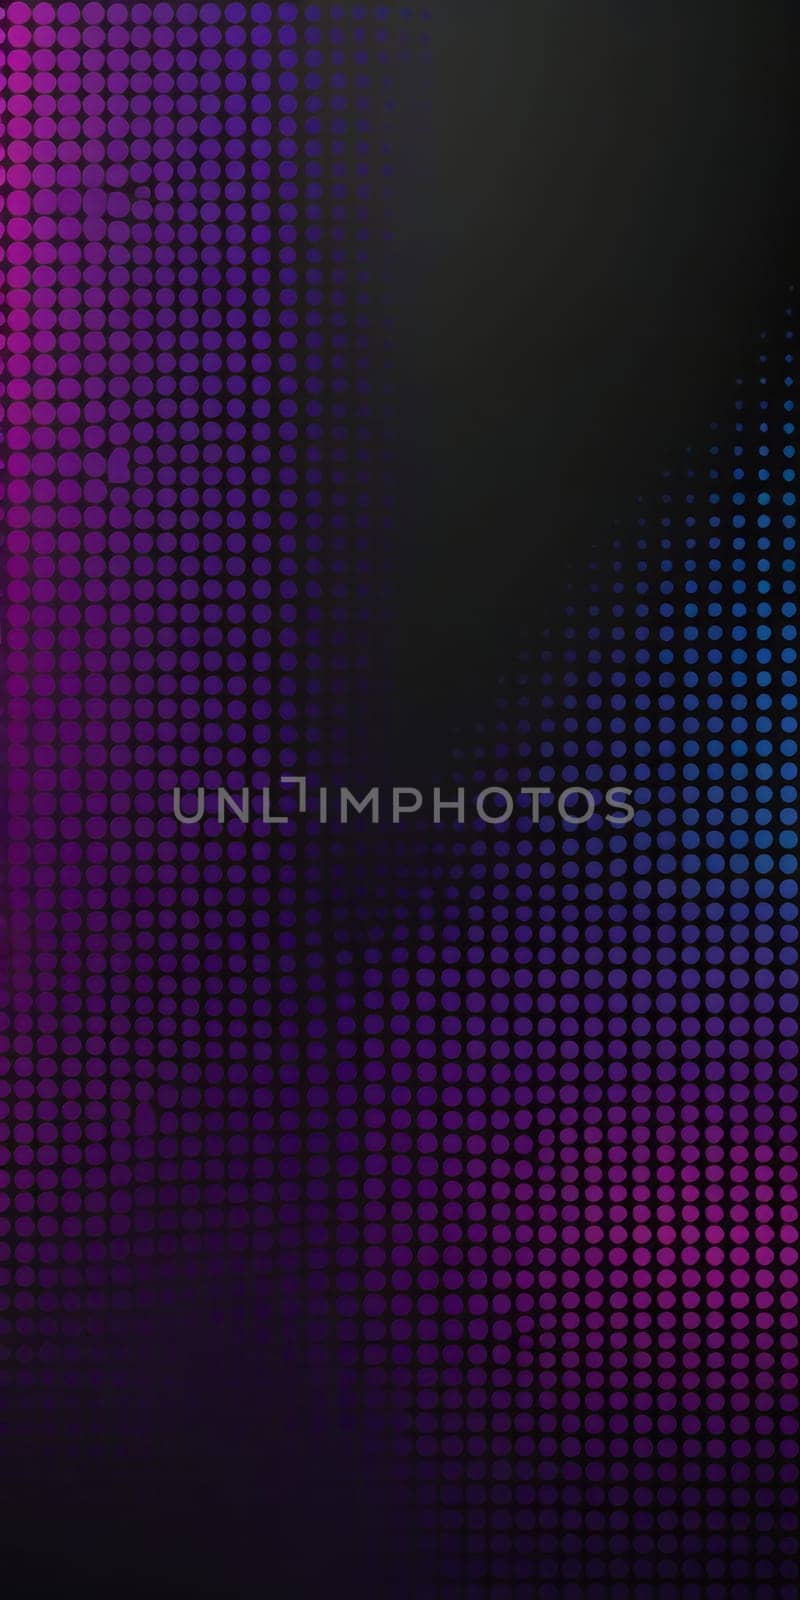 Dotted Shapes in Black and Purple by nkotlyar